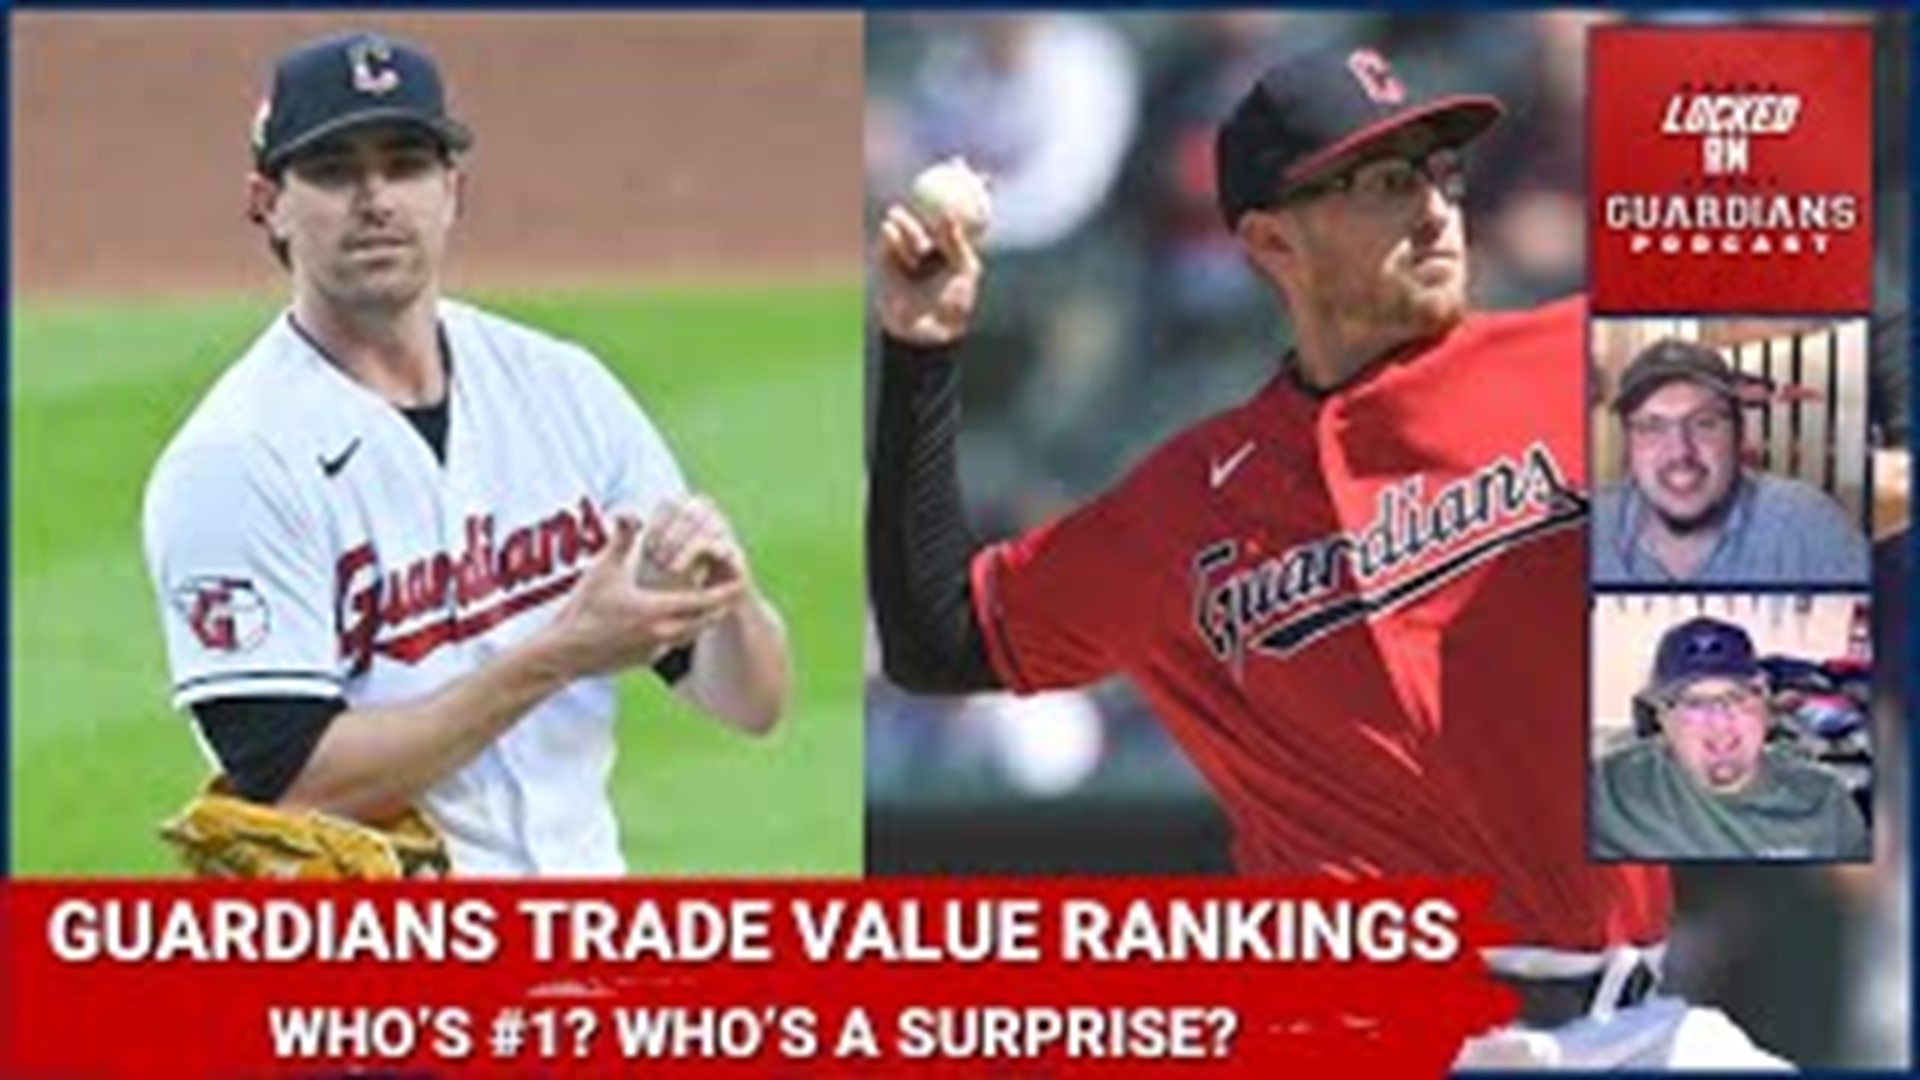 The Guardians haven't made a (big) trade yet this offseason. Who know if they will? In the meantime, who has the most trade value on their roster or in their system?